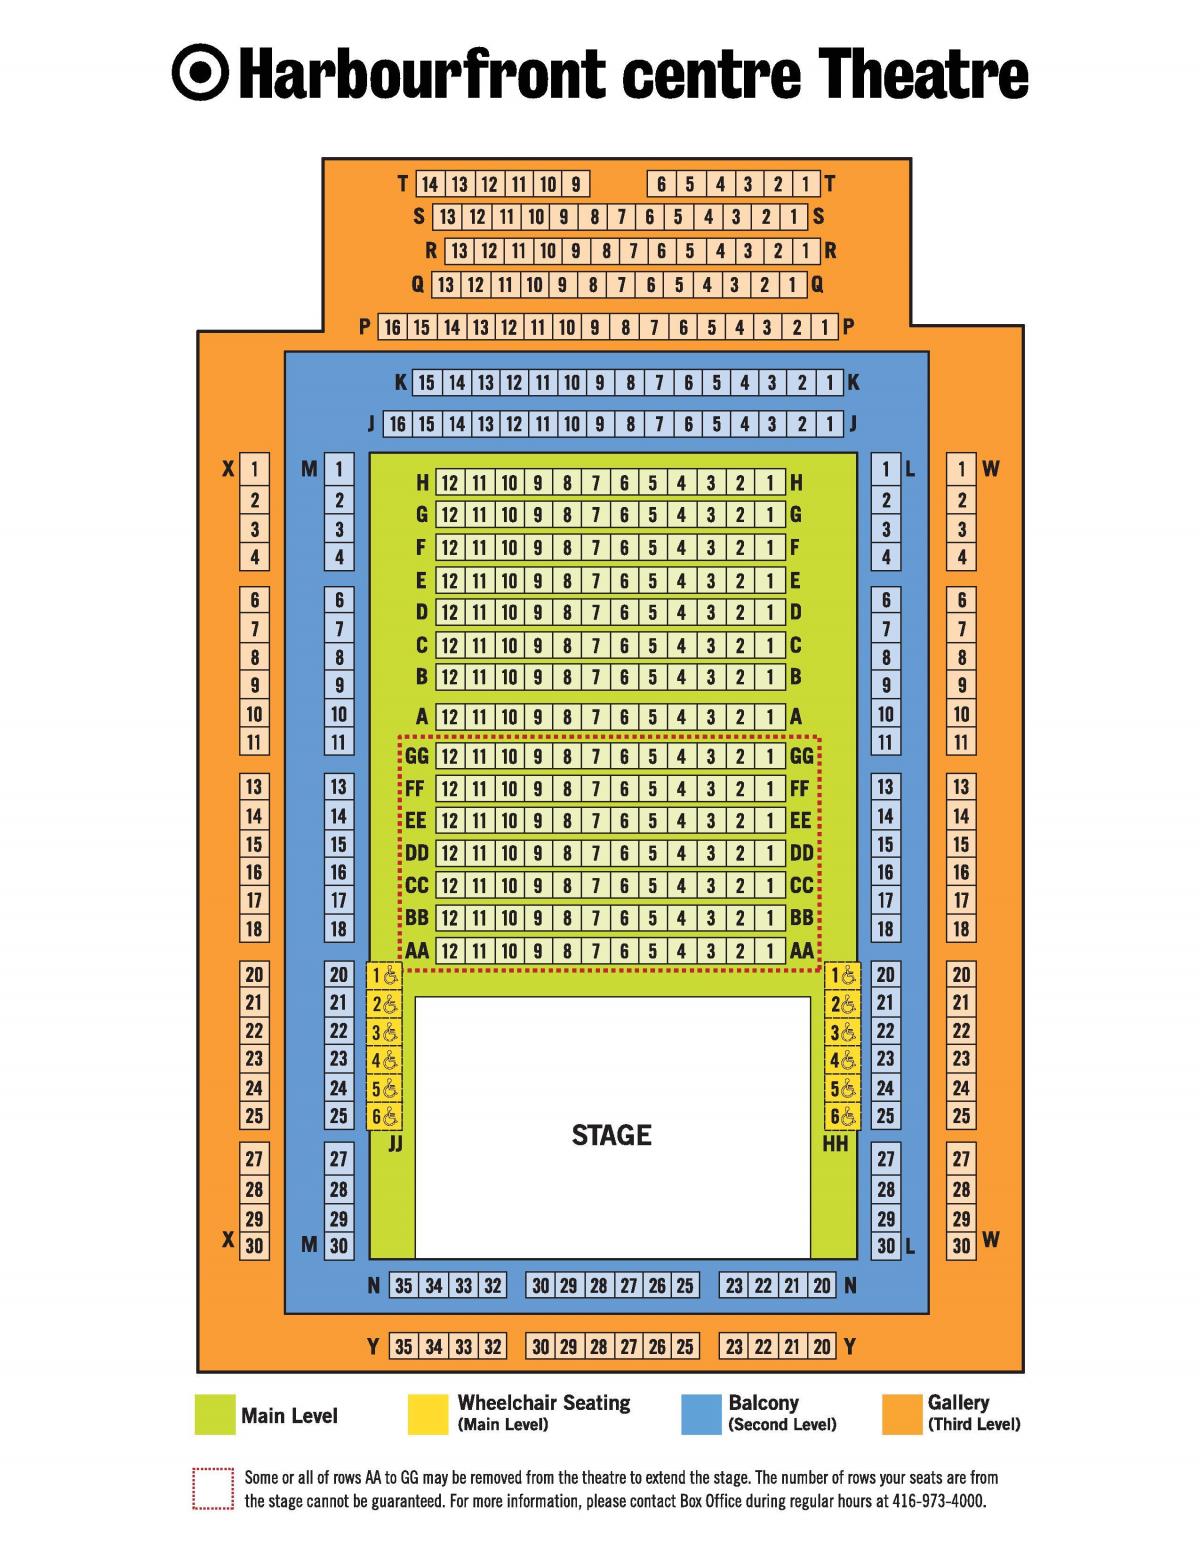 Map of Harbourfront Centre theatre